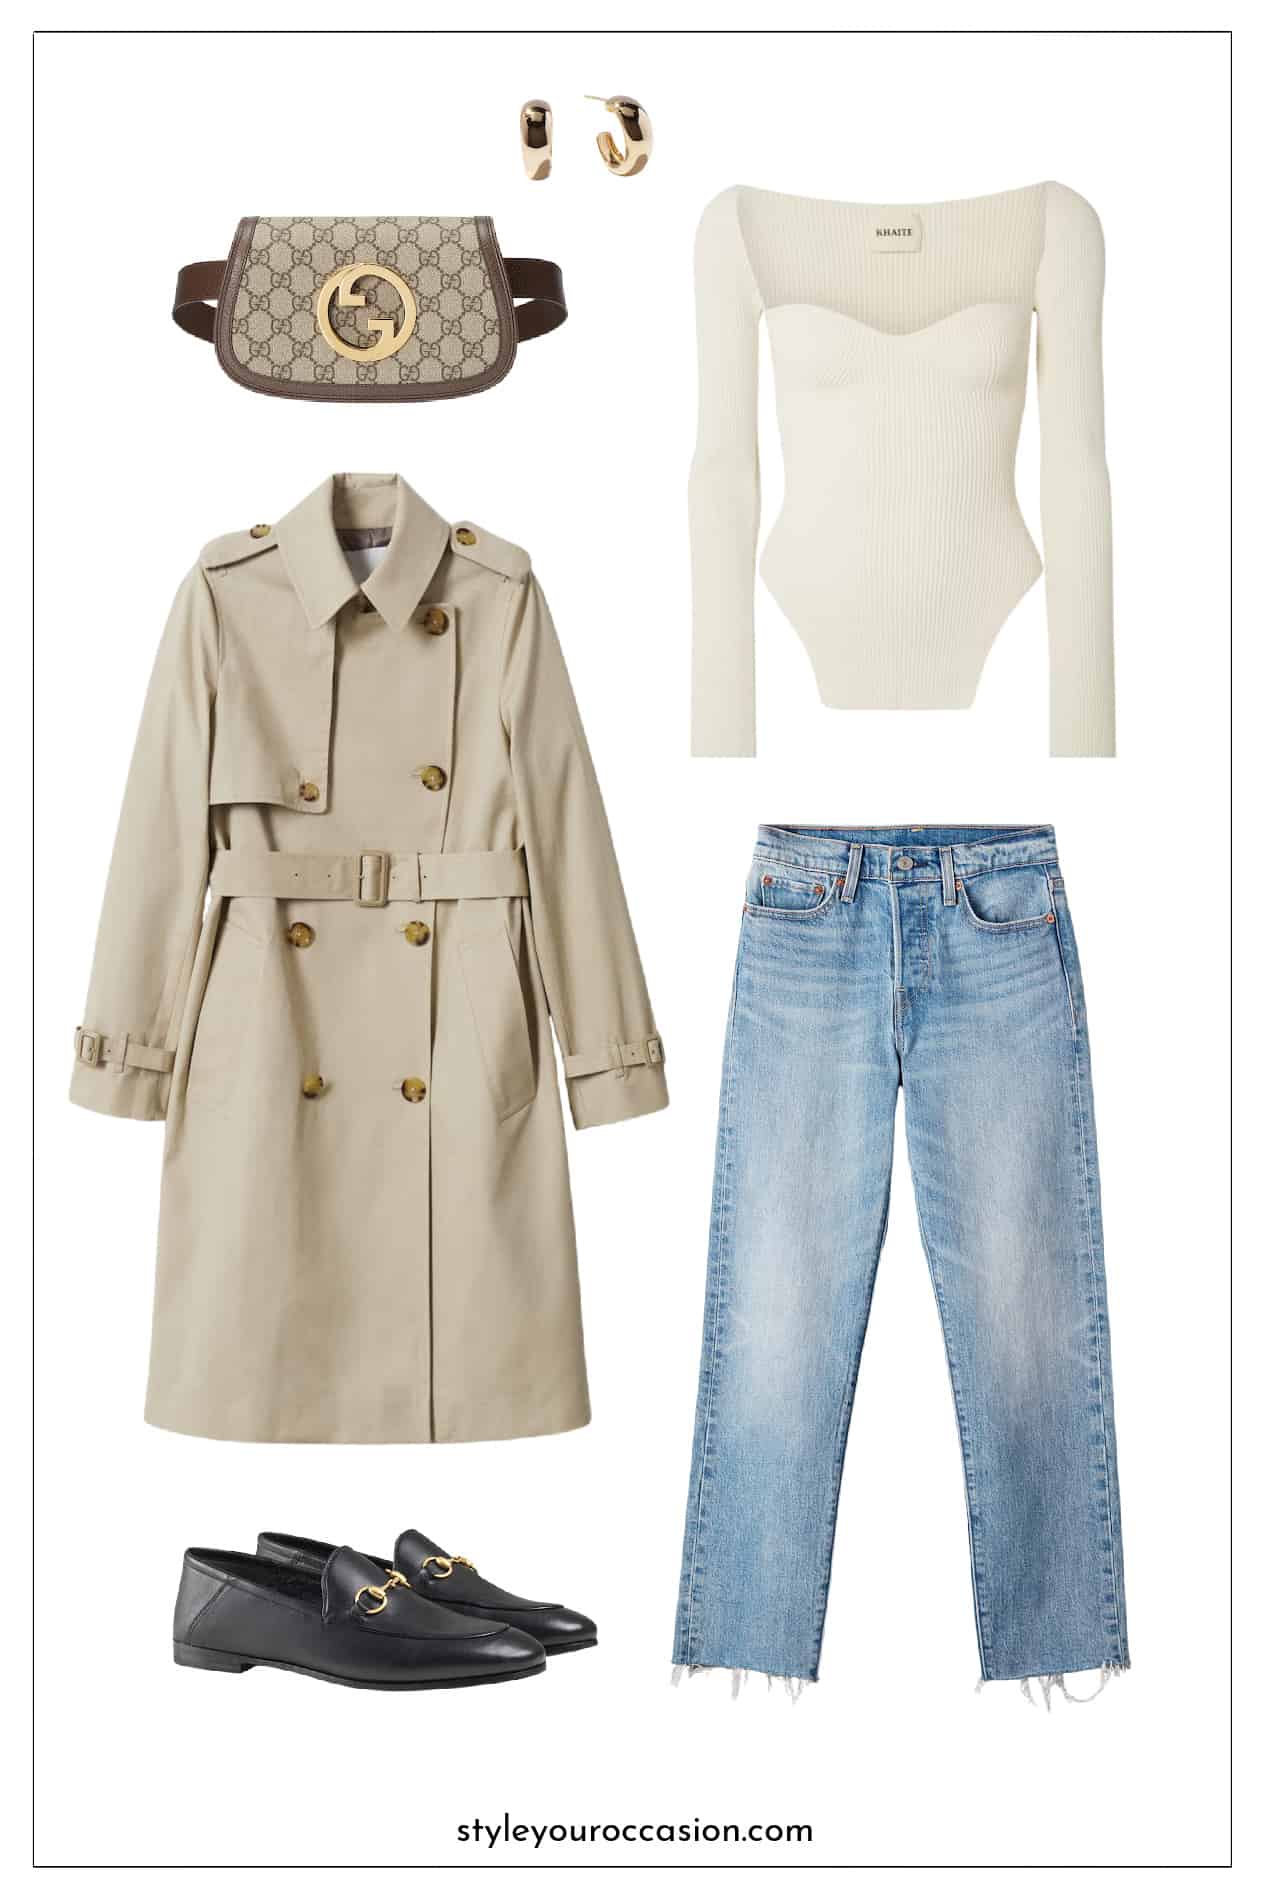 outfit mood board with jeans, a ribbed knit ivory top, tan trench coat, black Gucci loafers, and canvas Gucci belt bag